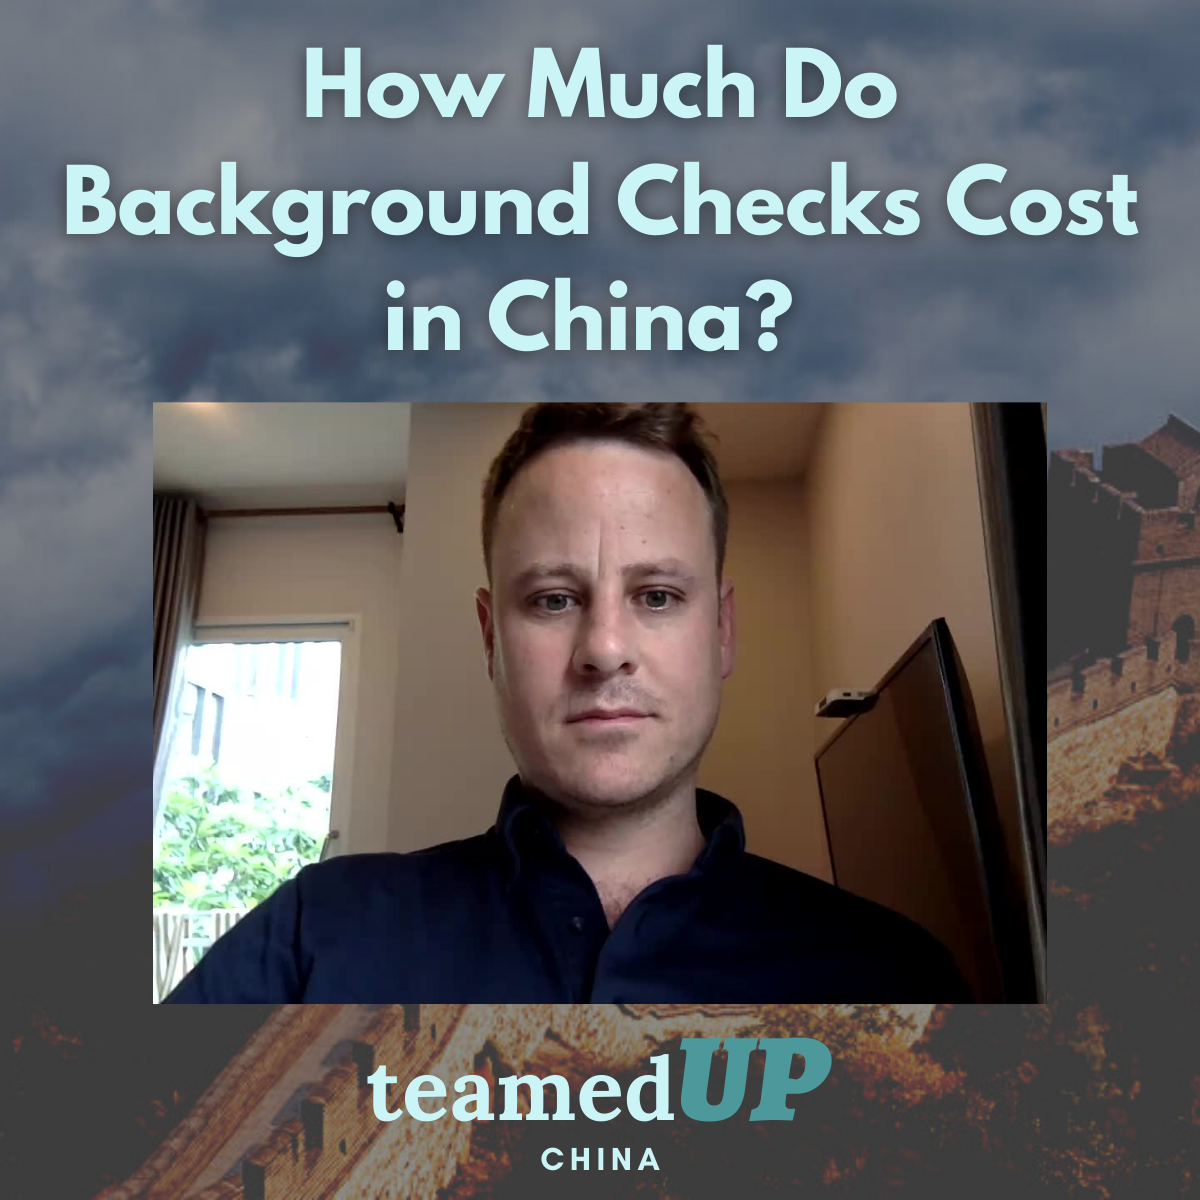 How Much Do Background Checks Cost in China?